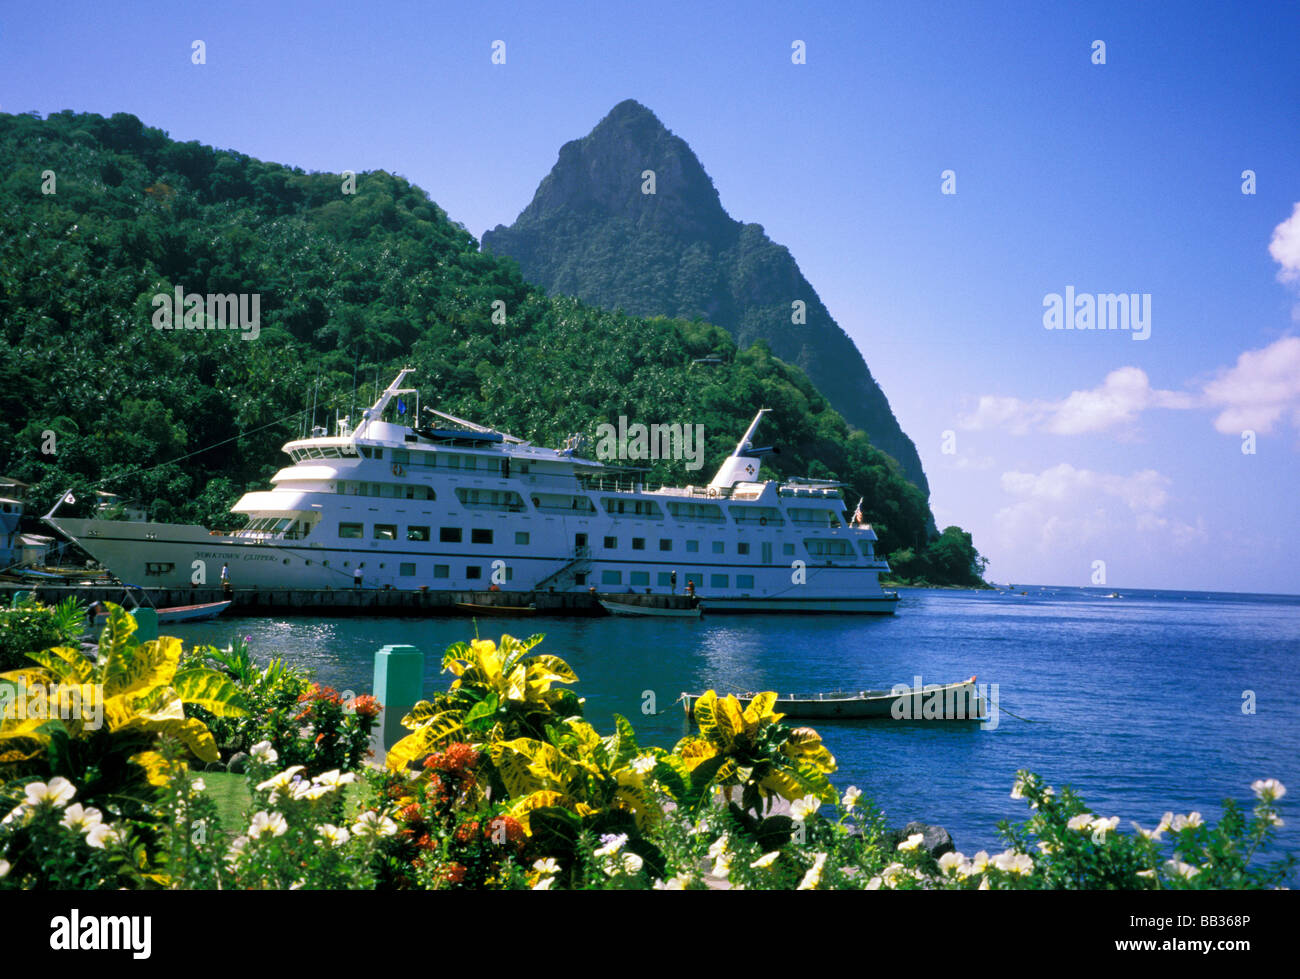 Caribbean, St. Lucia, Soufriere. Cruise ship in harbor. Stock Photo